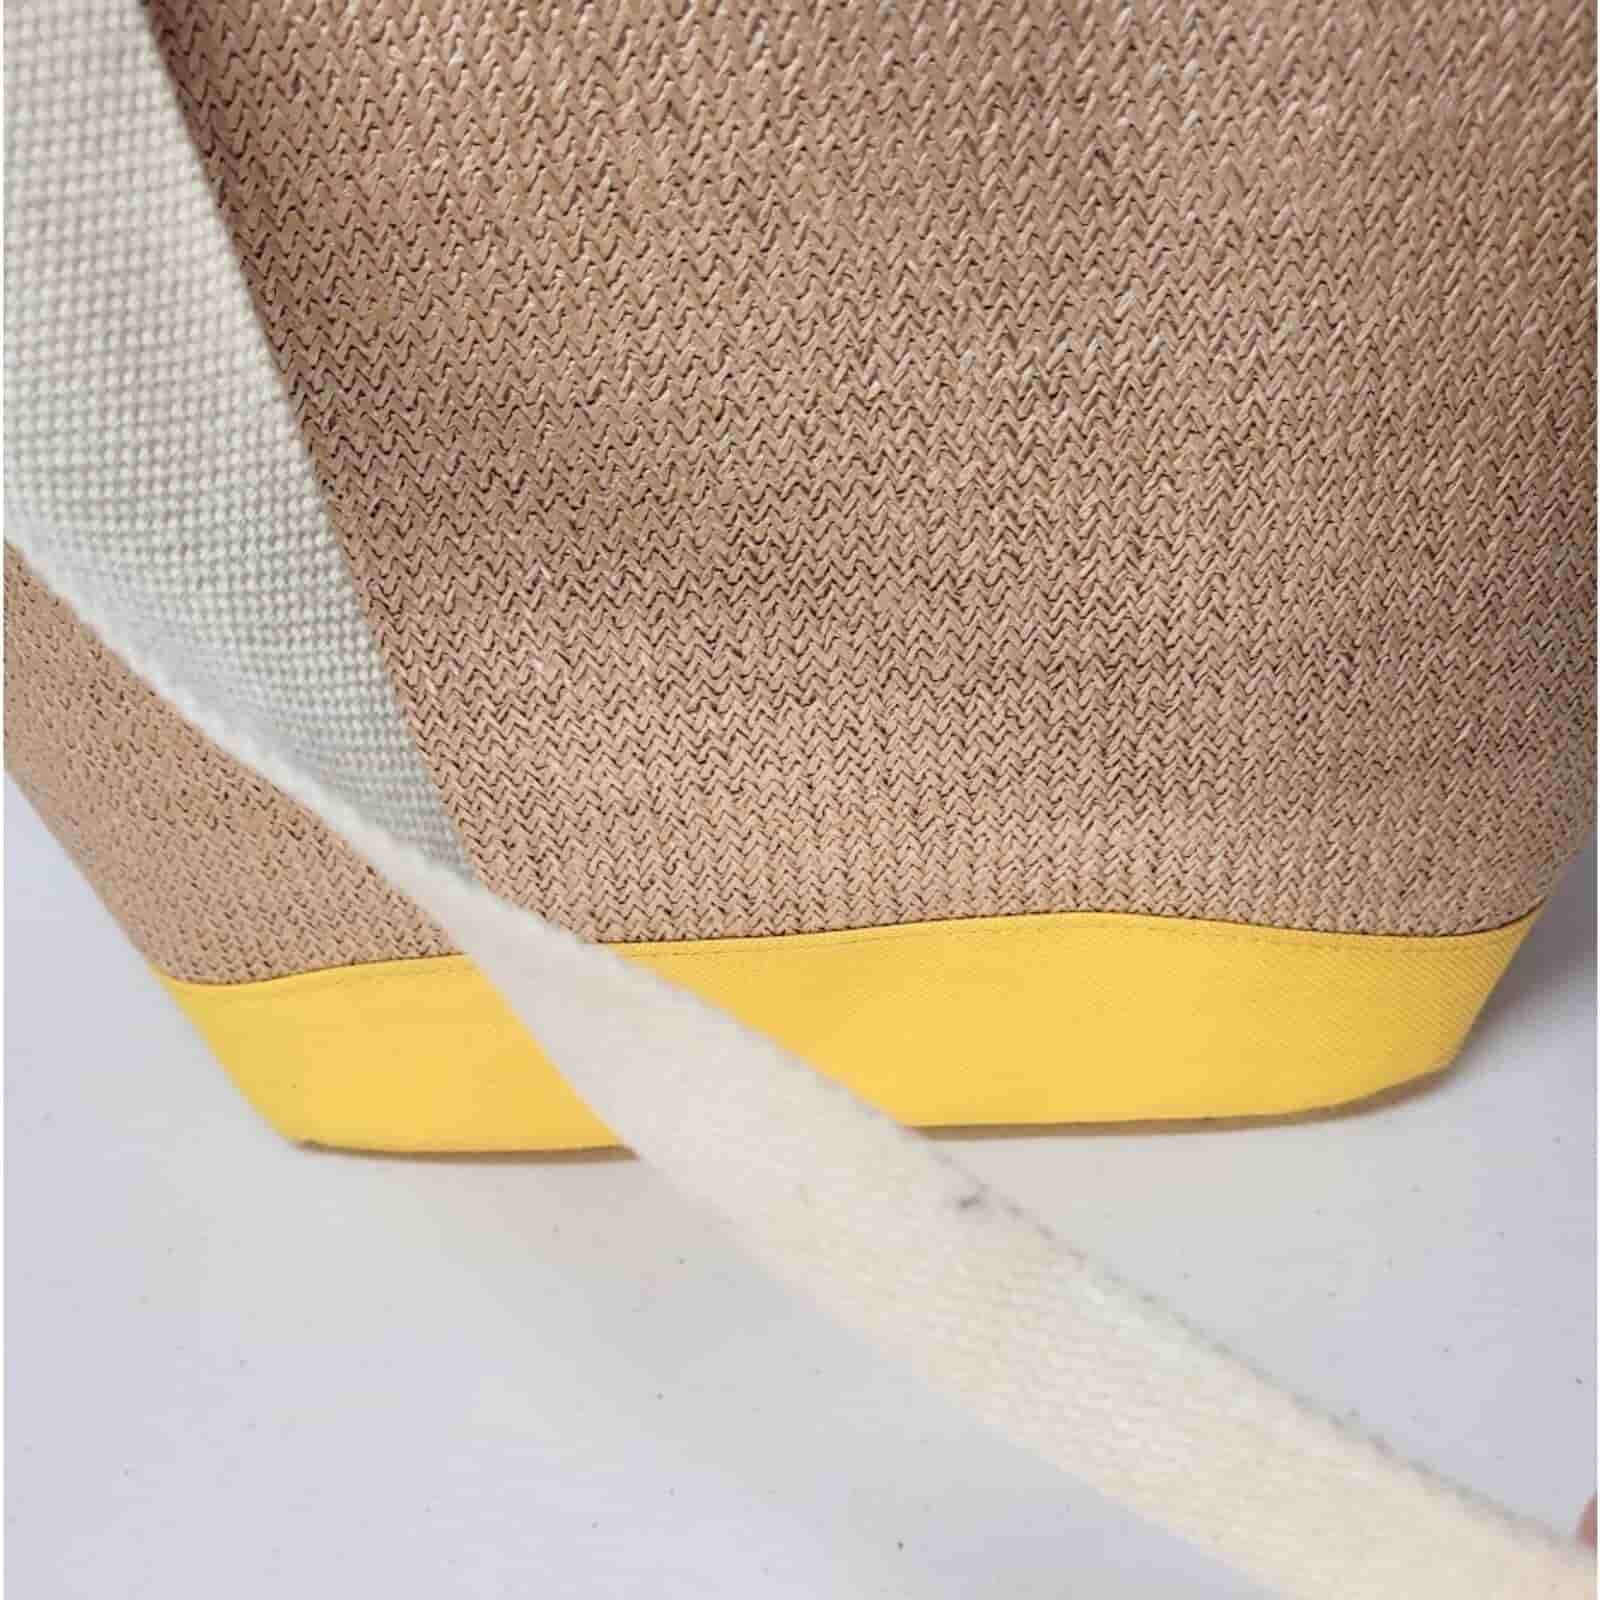 Insulated Lunch Bag Cooler Beach Tote Yellow Beige Weave Straw wholesale details1